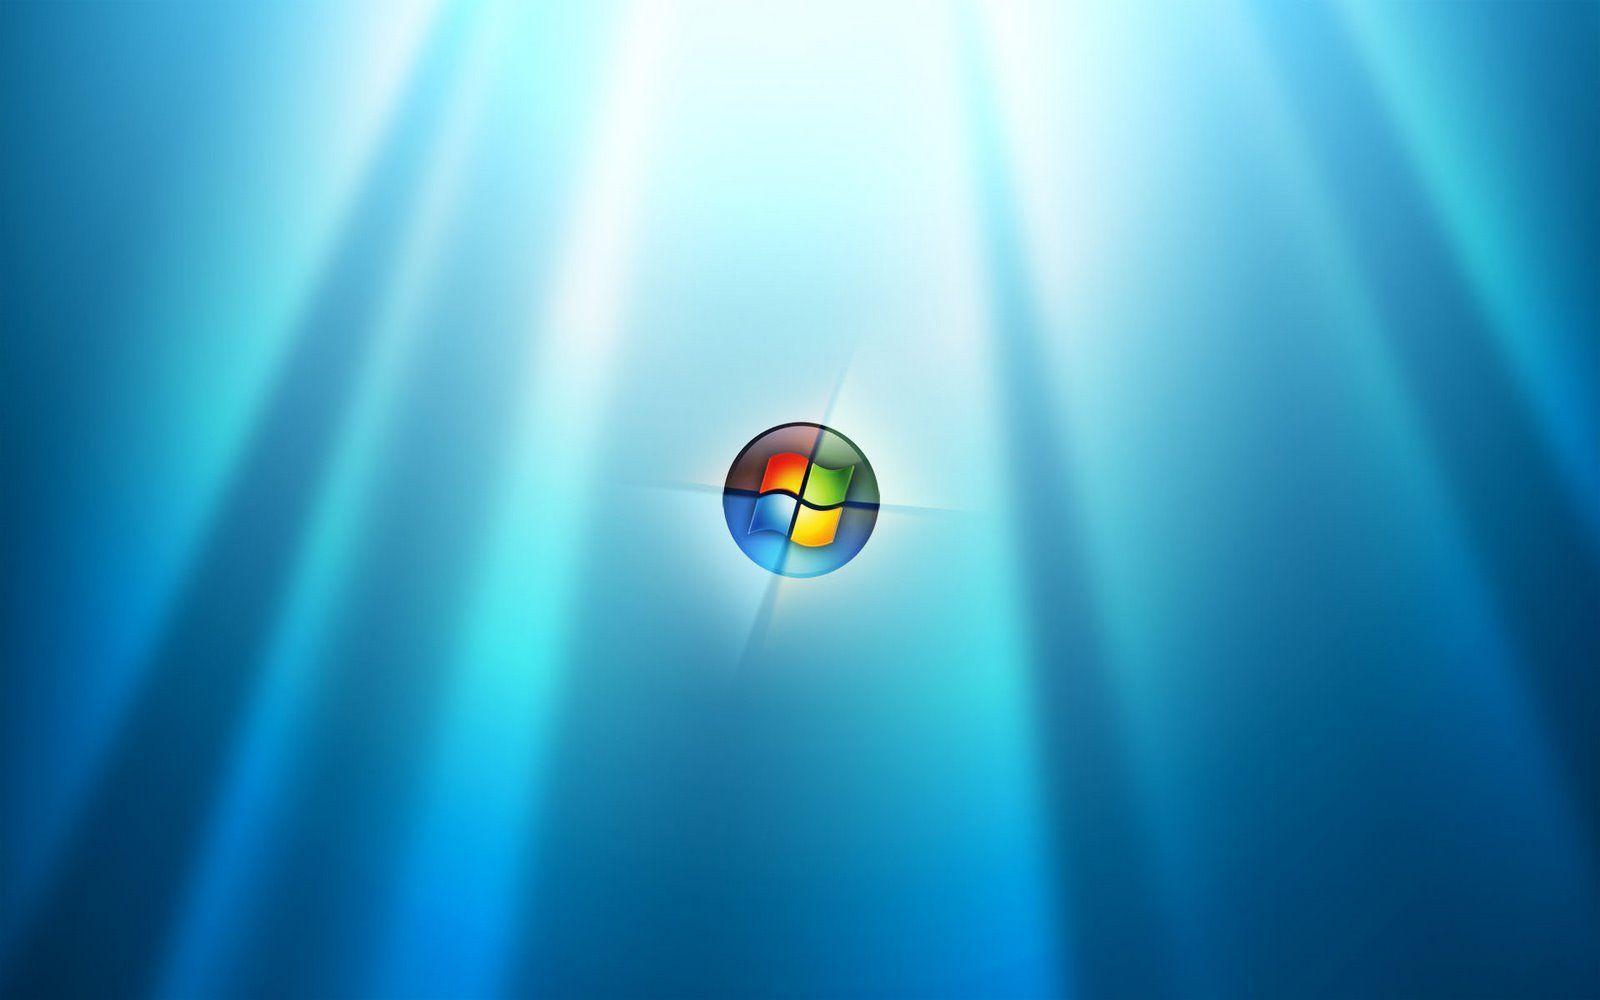 Windows 7 Official Wallpapers - Wallpaper Cave